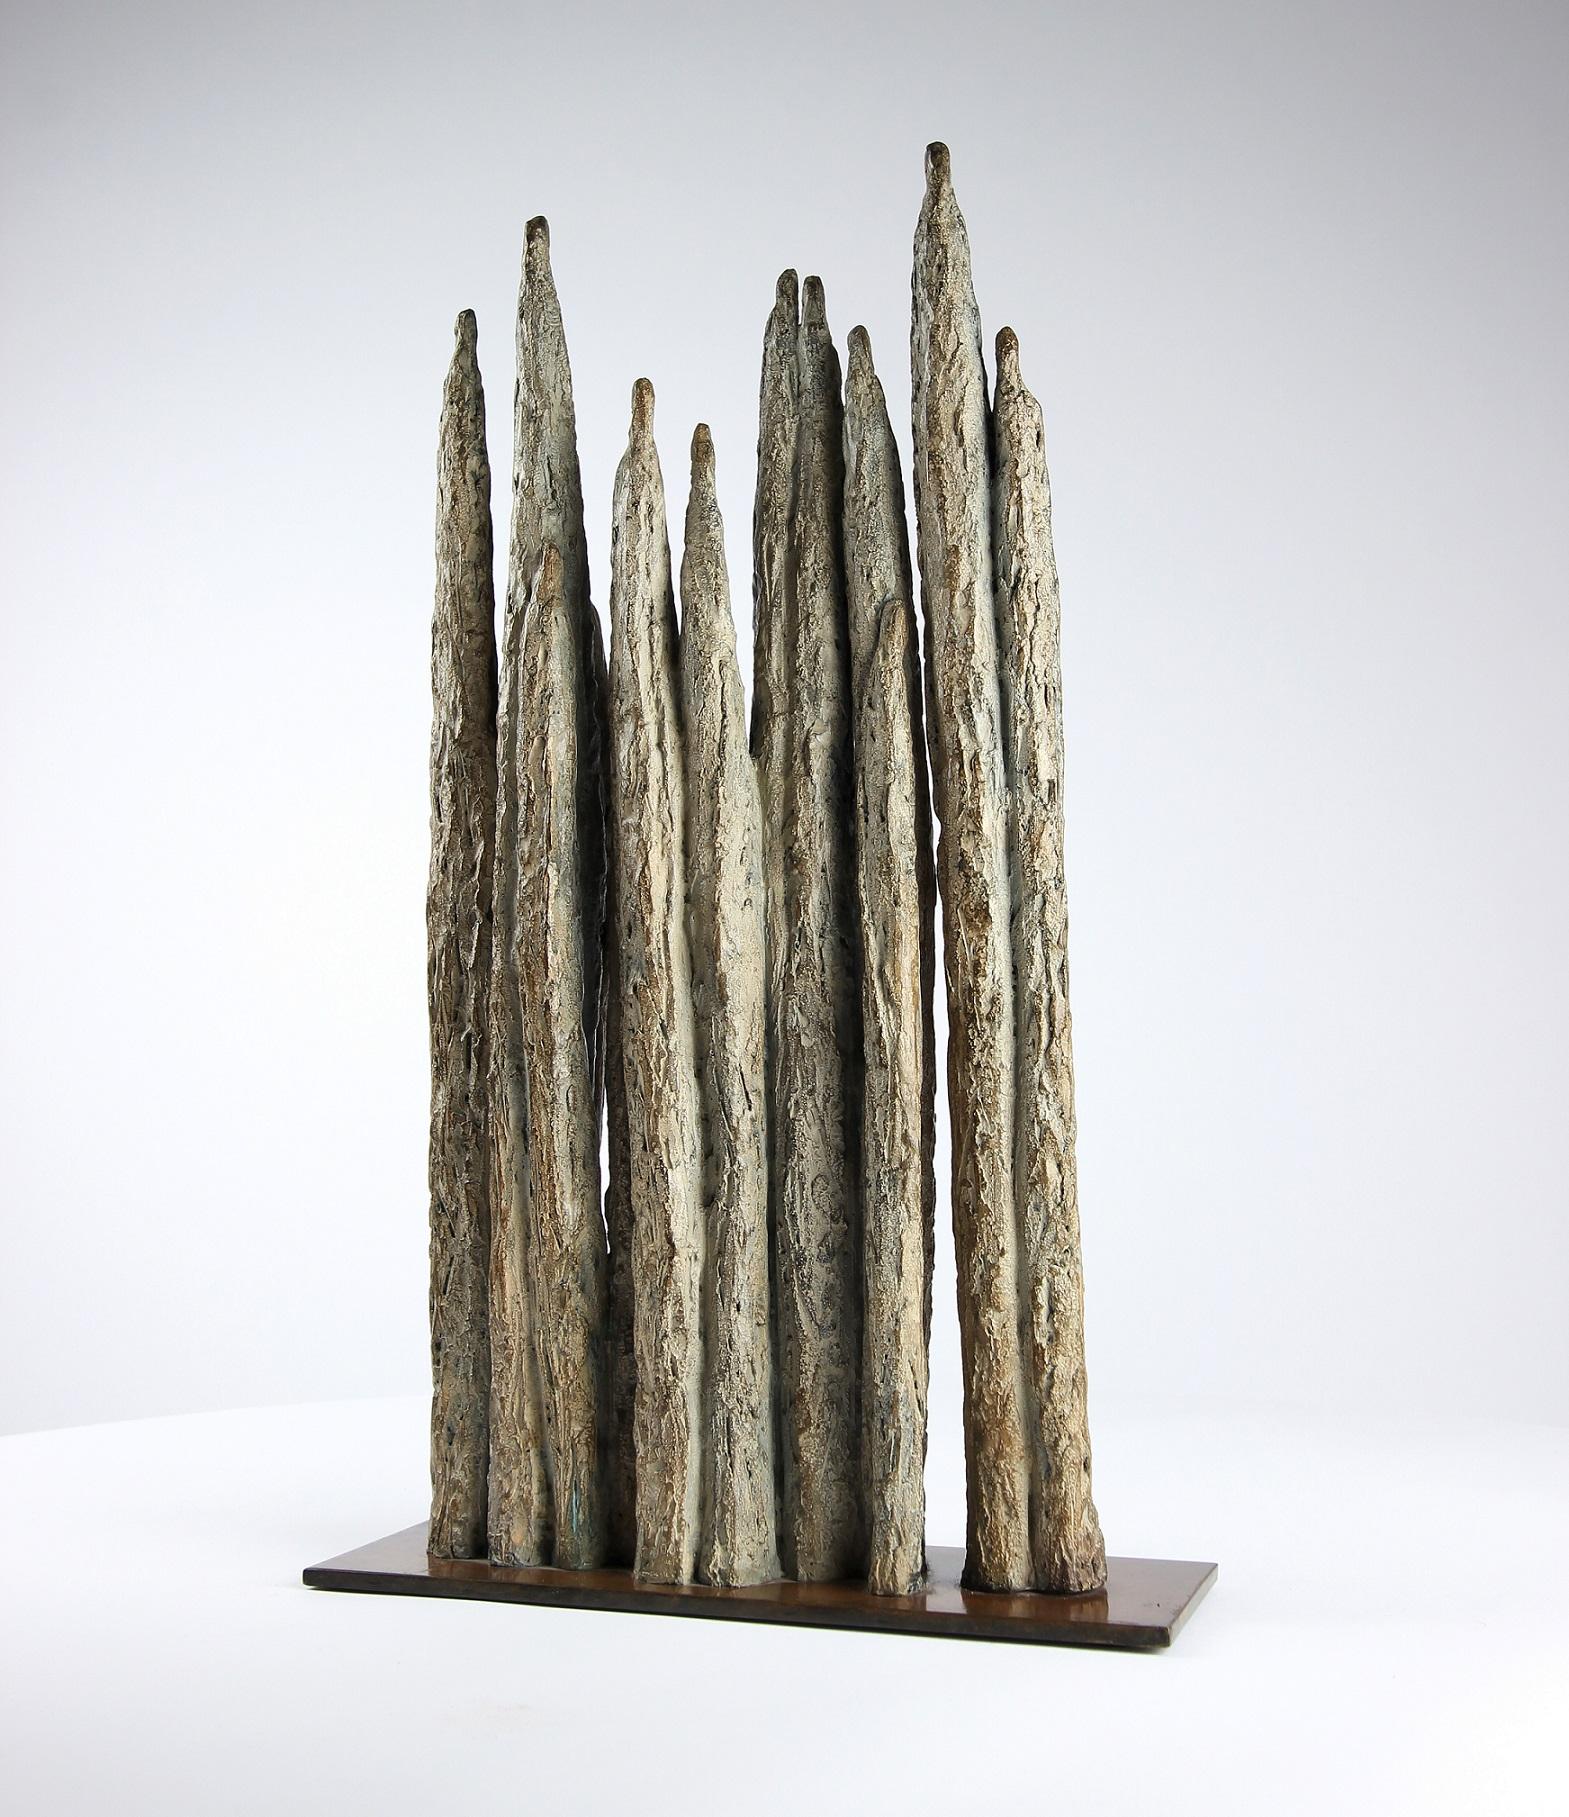 Invitation by Delphine Brabant - bronze sculpture, group of human figures For Sale 2